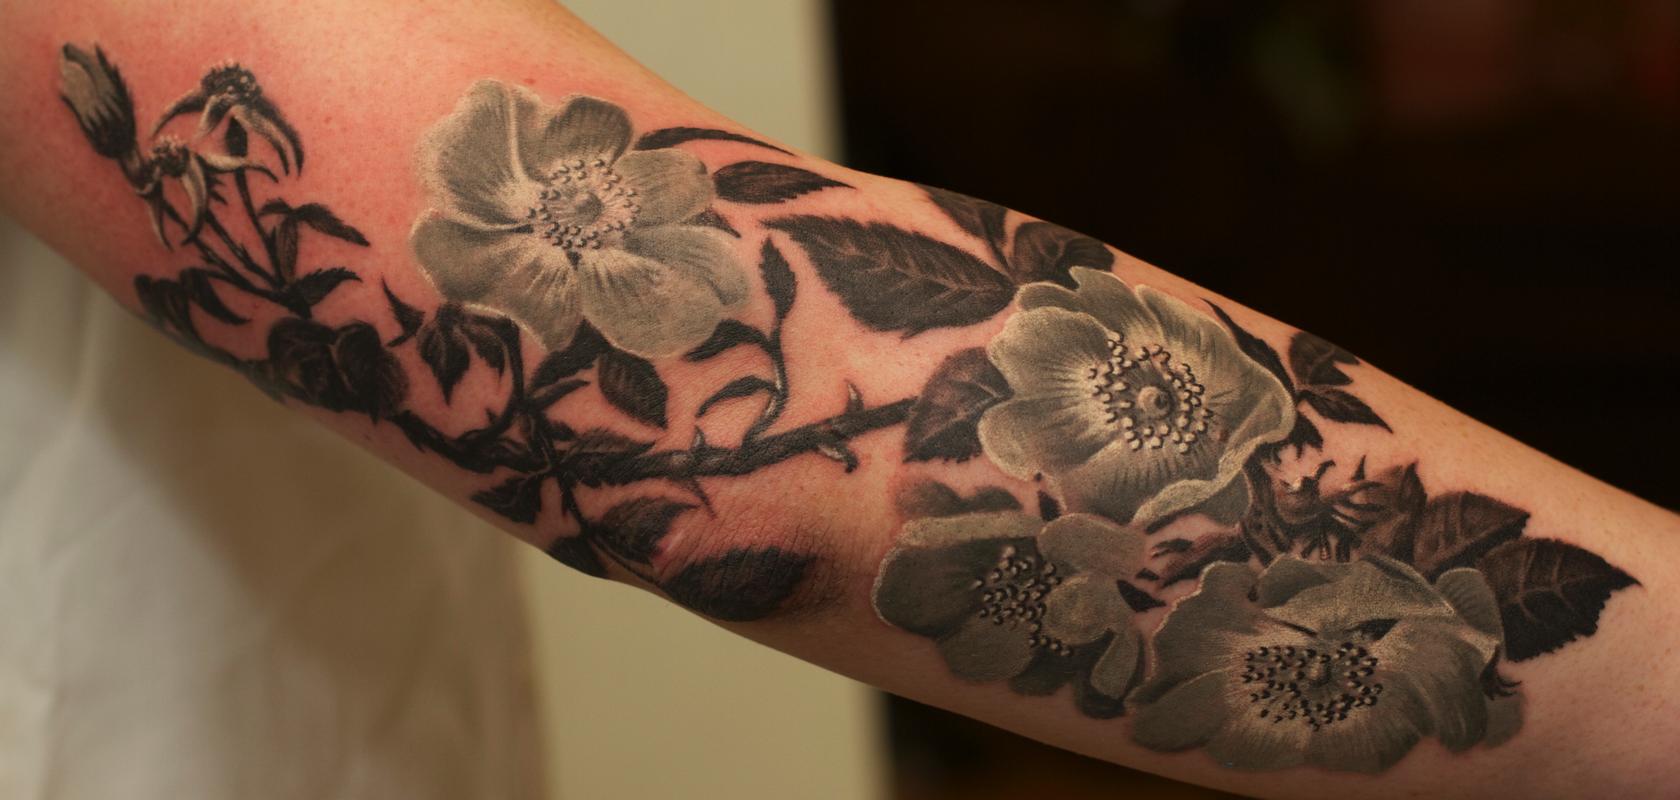 Painted Temple  Tattoos  Flower Vine  Shawn Monaco Roses  Black and Grey